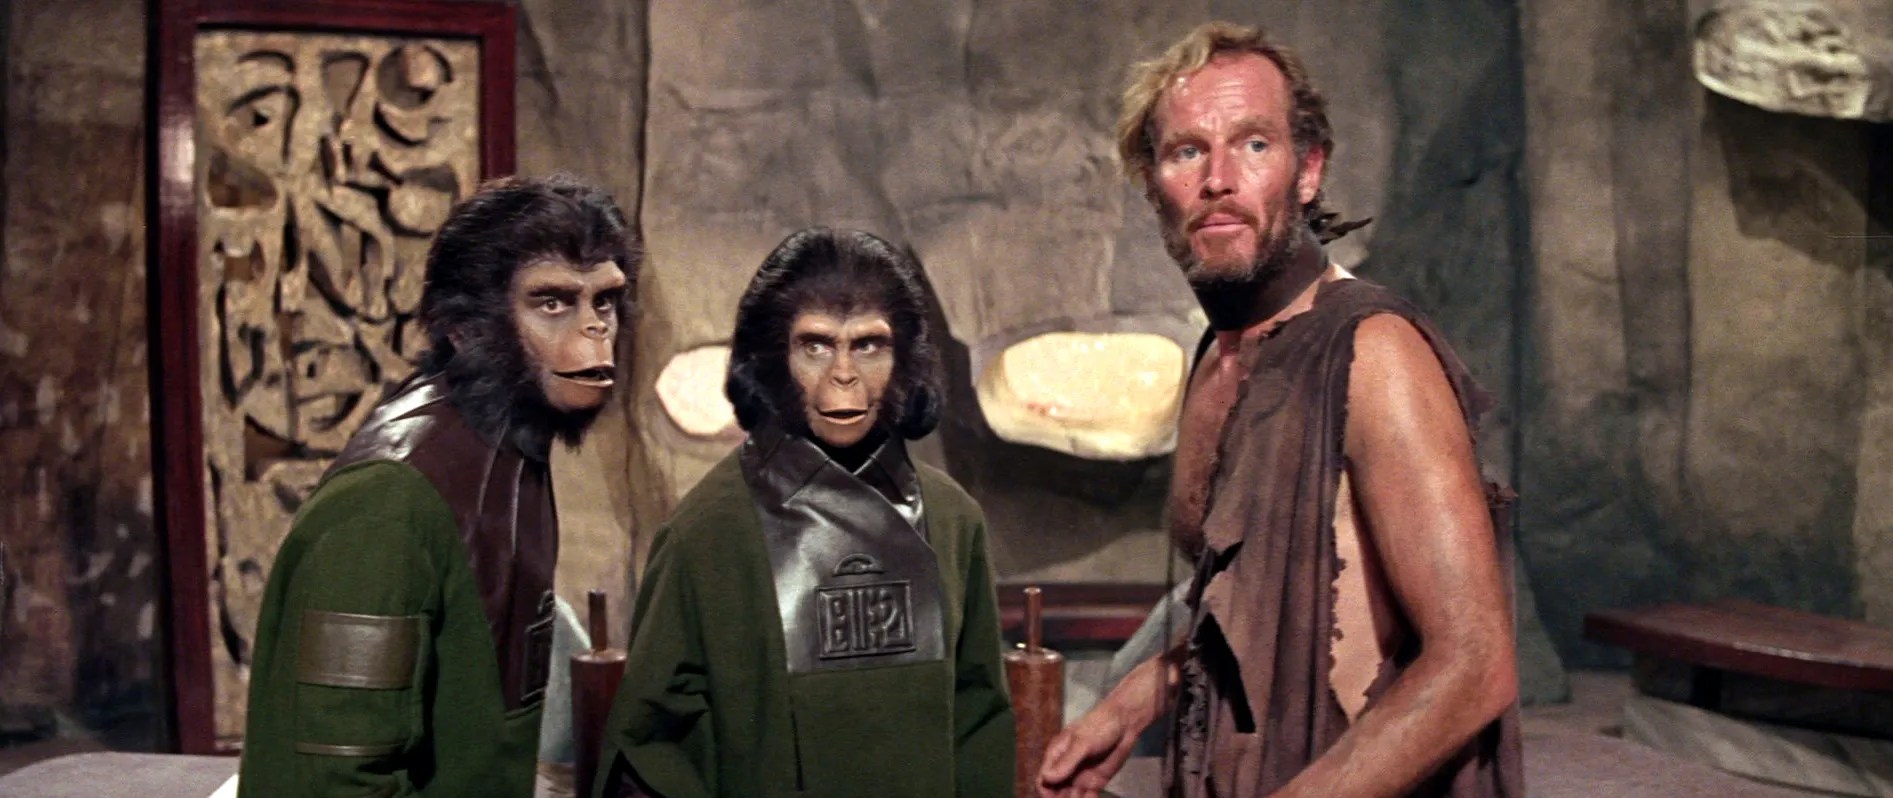 Roddy McDowall as Cornelius, Kim Hunter as Zira, and Charlton Heston as Taylor in the original Planet of the Apes